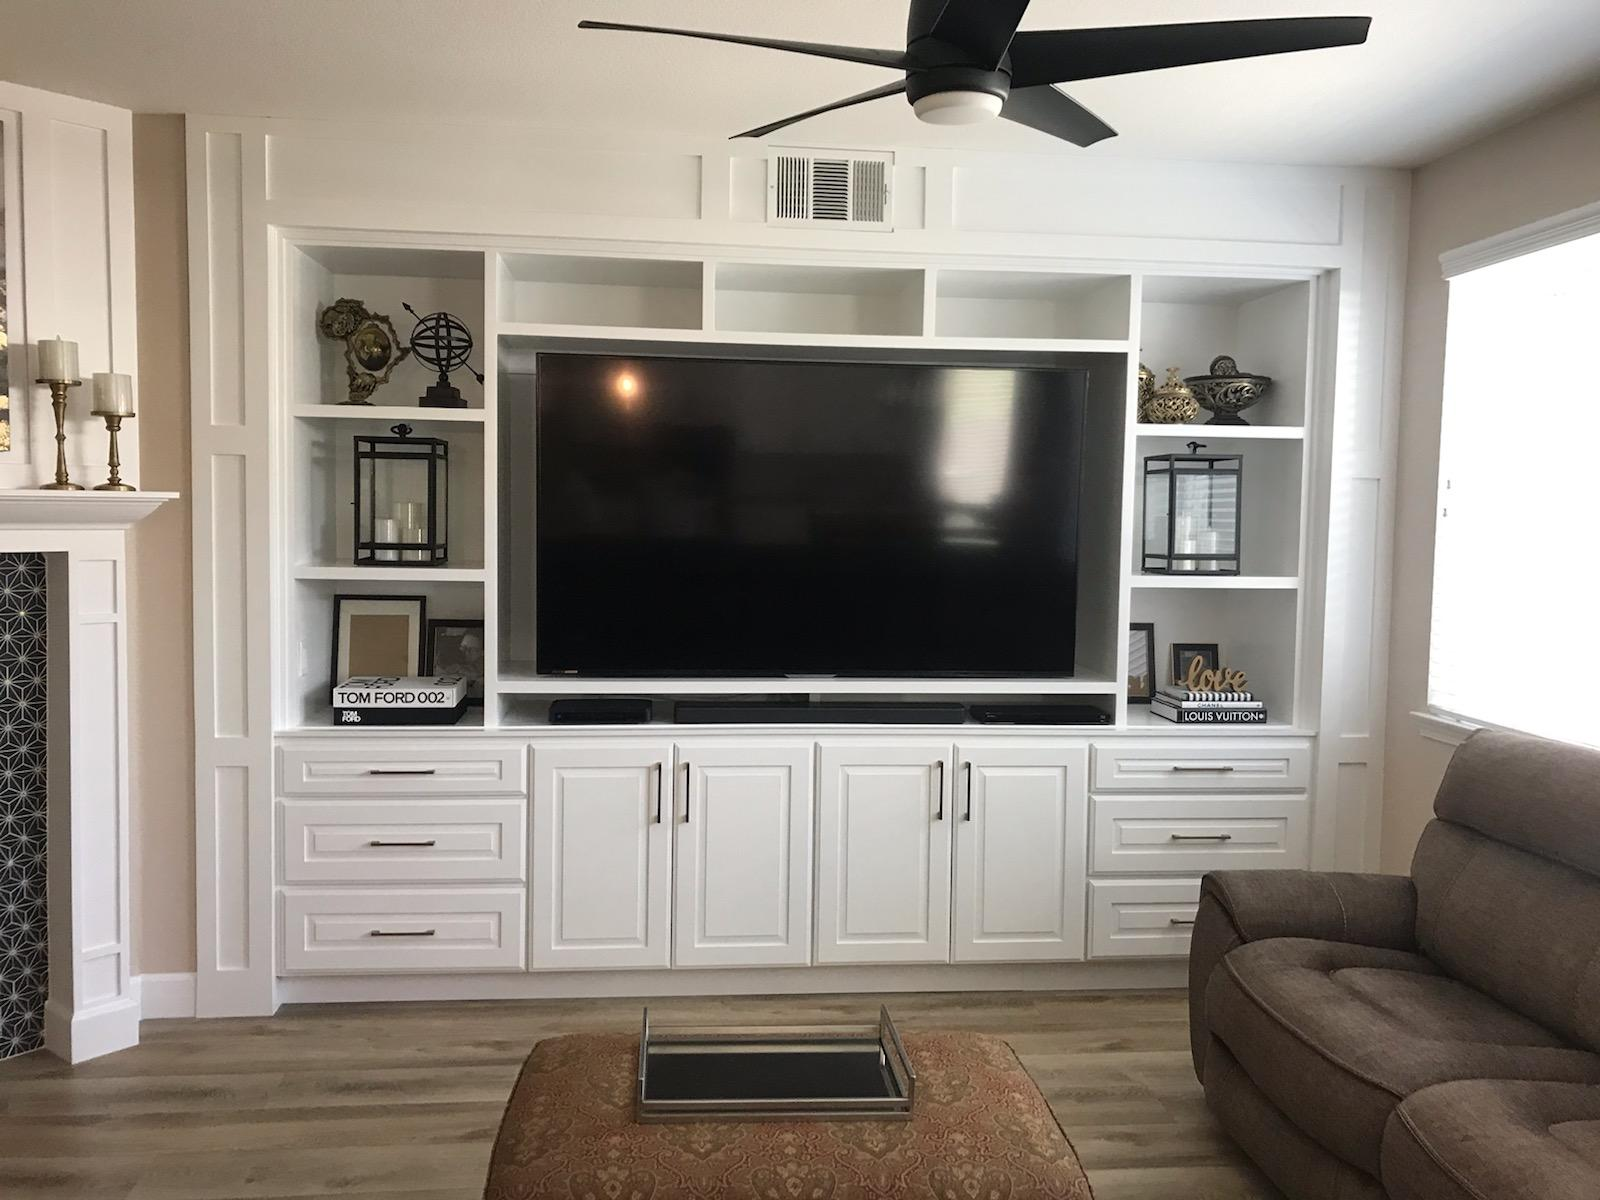 Alcove cabinets and shelving build to hold a TV